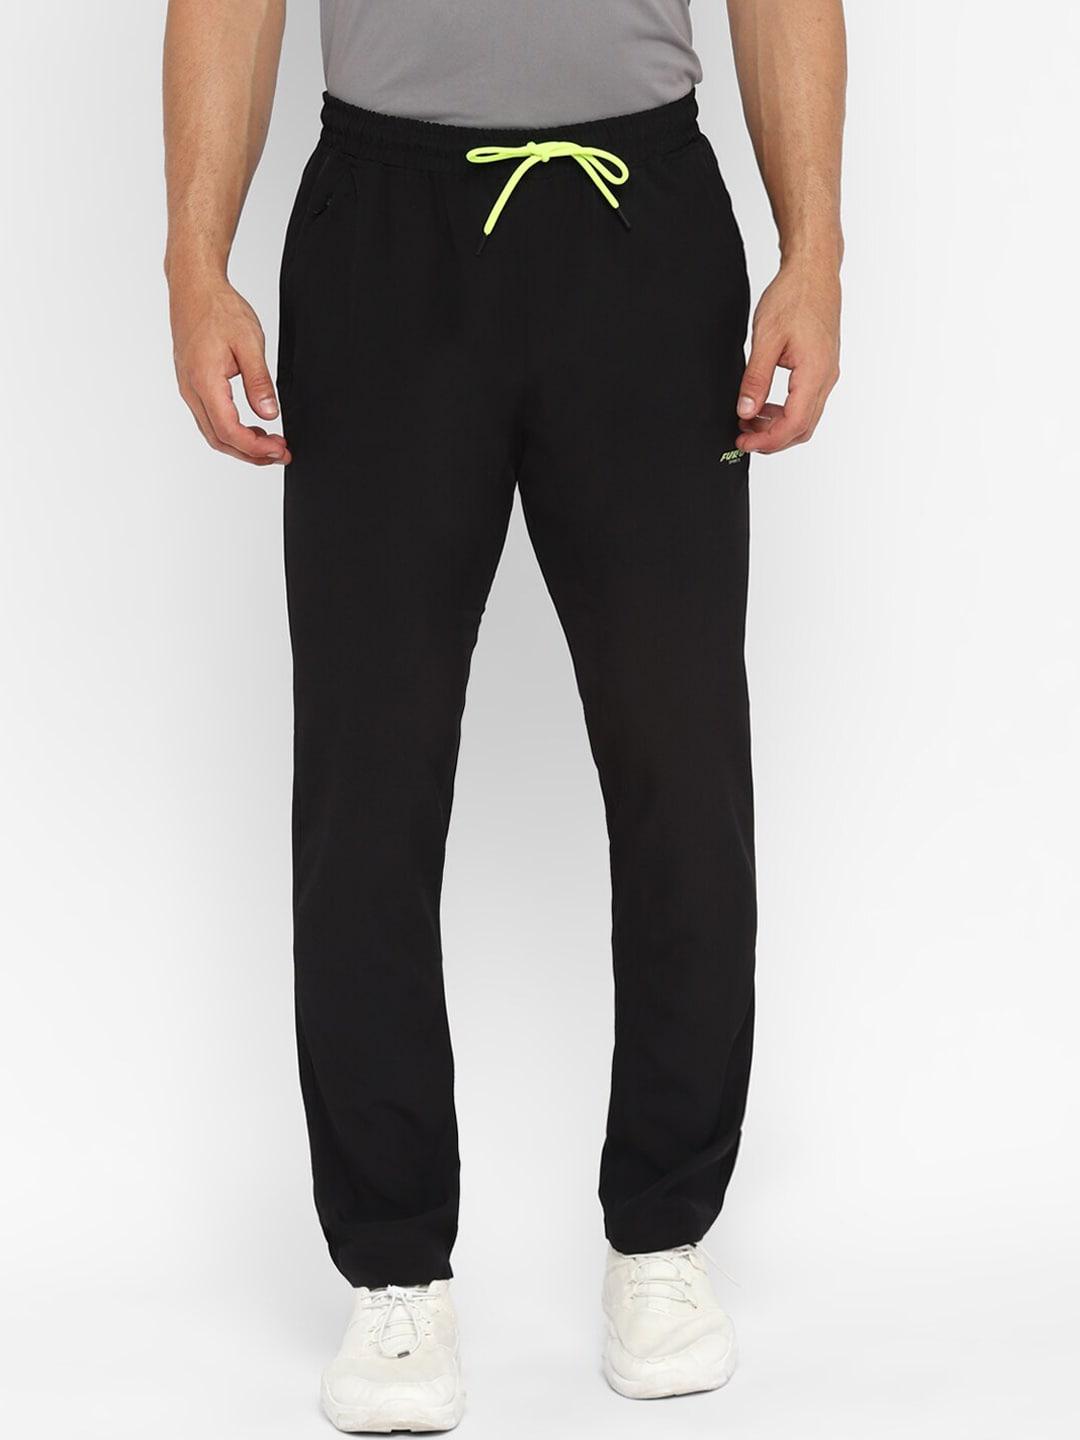 furo-by-red-chief-men-black-solid-mid-rise-sports-track-pants